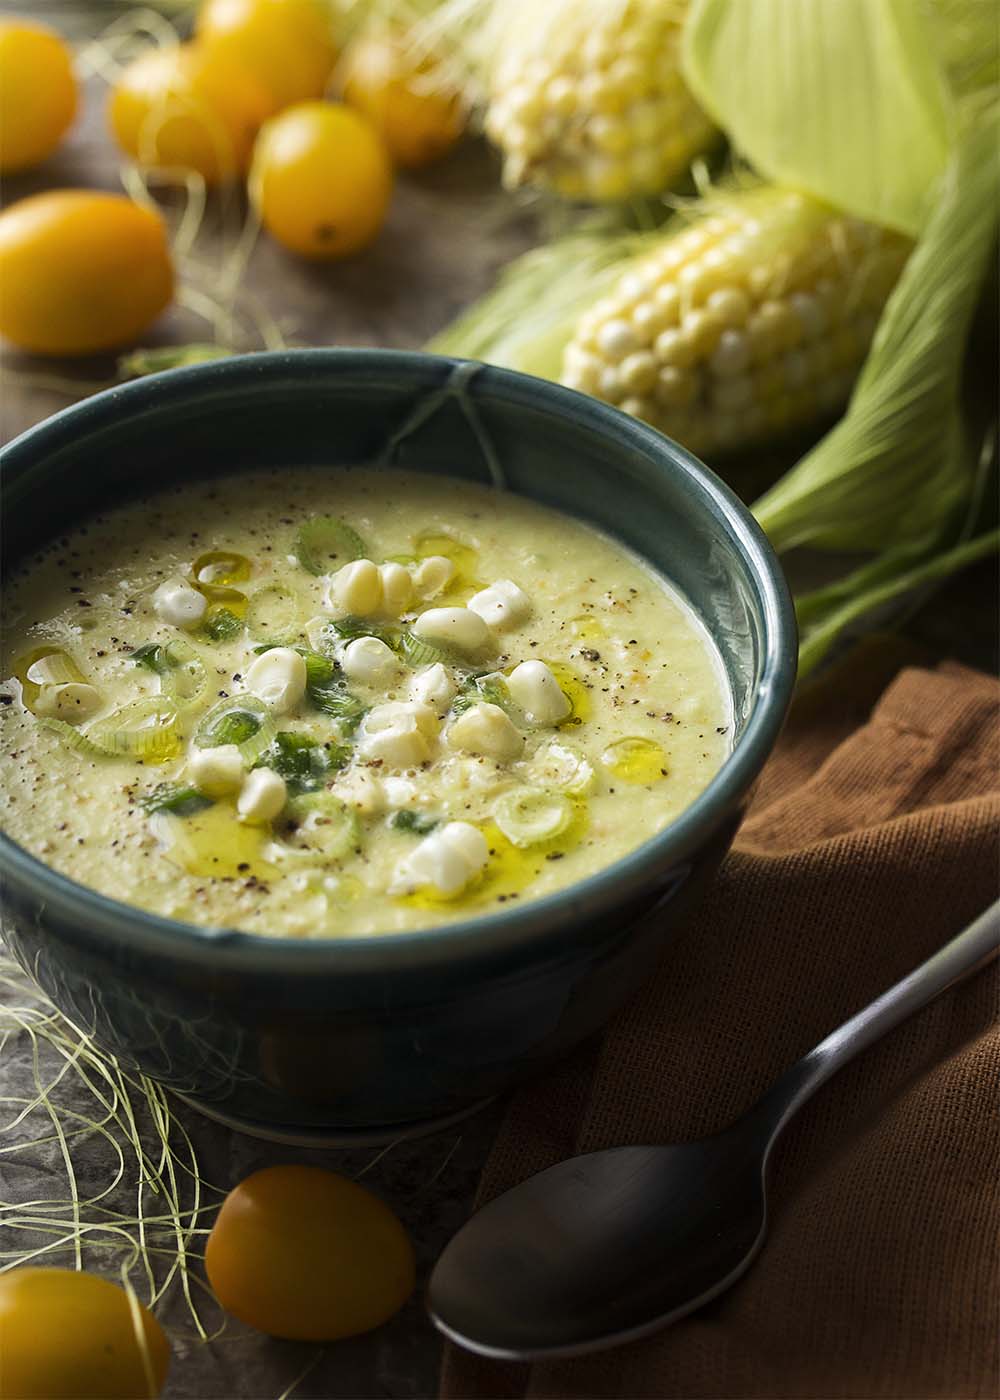 Rustic green bowl of sweet and spicy corn gazpacho topped with corn kernels, jalapenos, and sliced scallions.